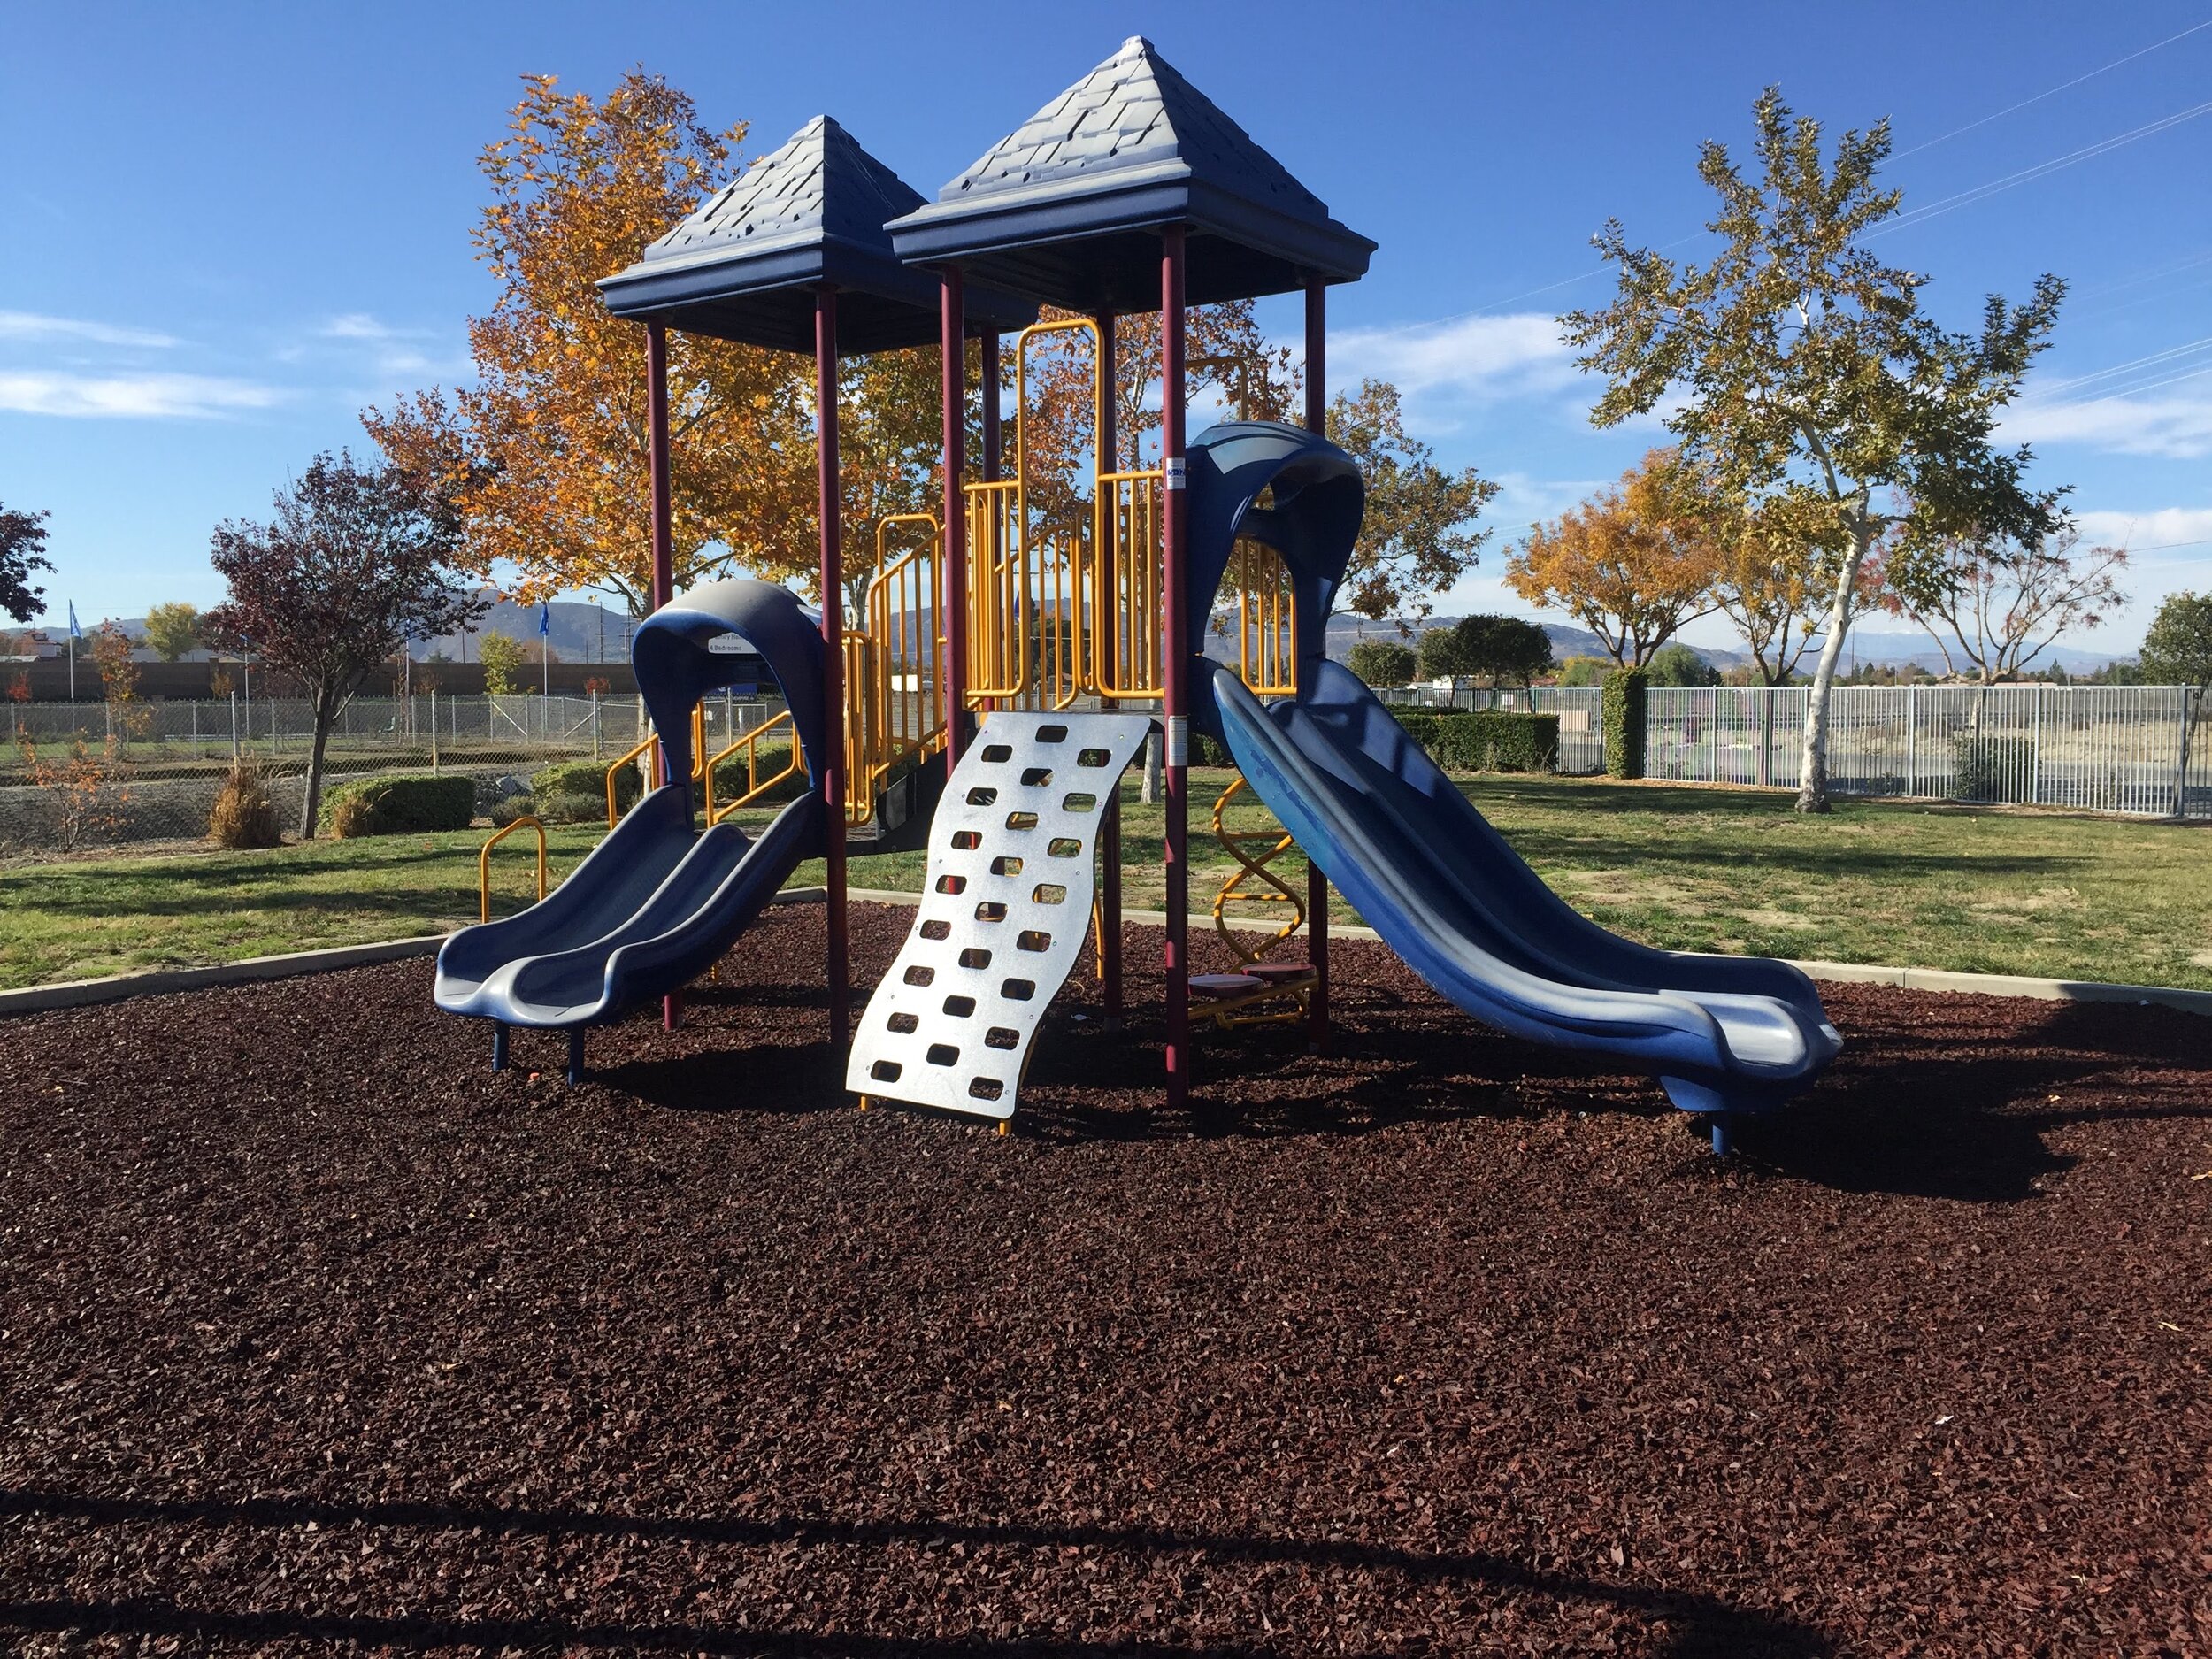 Inorganic mulches such as rubber mulch for a playground